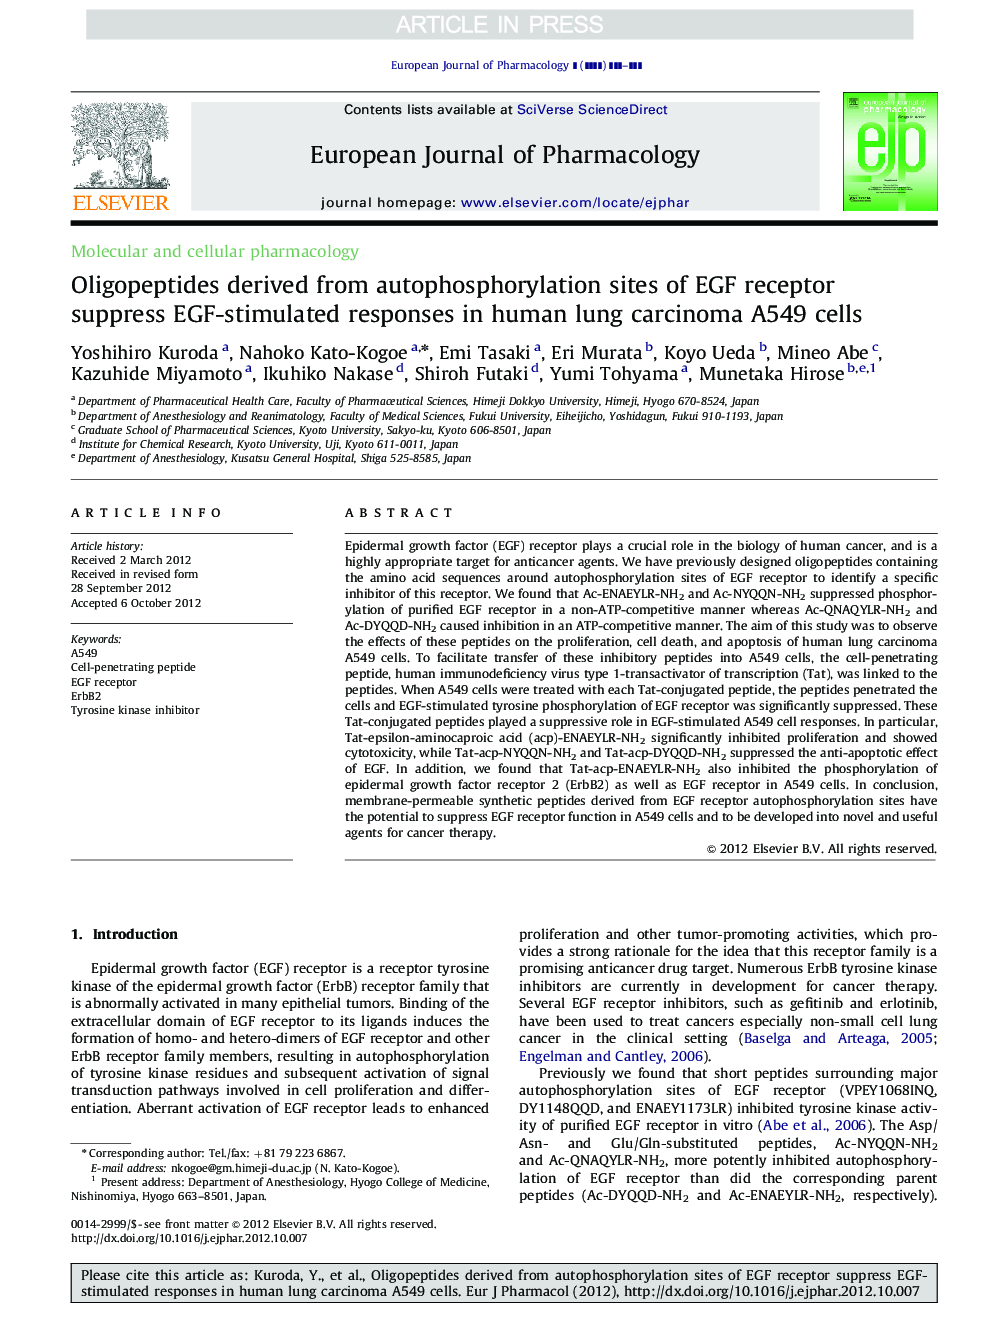 Oligopeptides derived from autophosphorylation sites of EGF receptor suppress EGF-stimulated responses in human lung carcinoma A549 cells